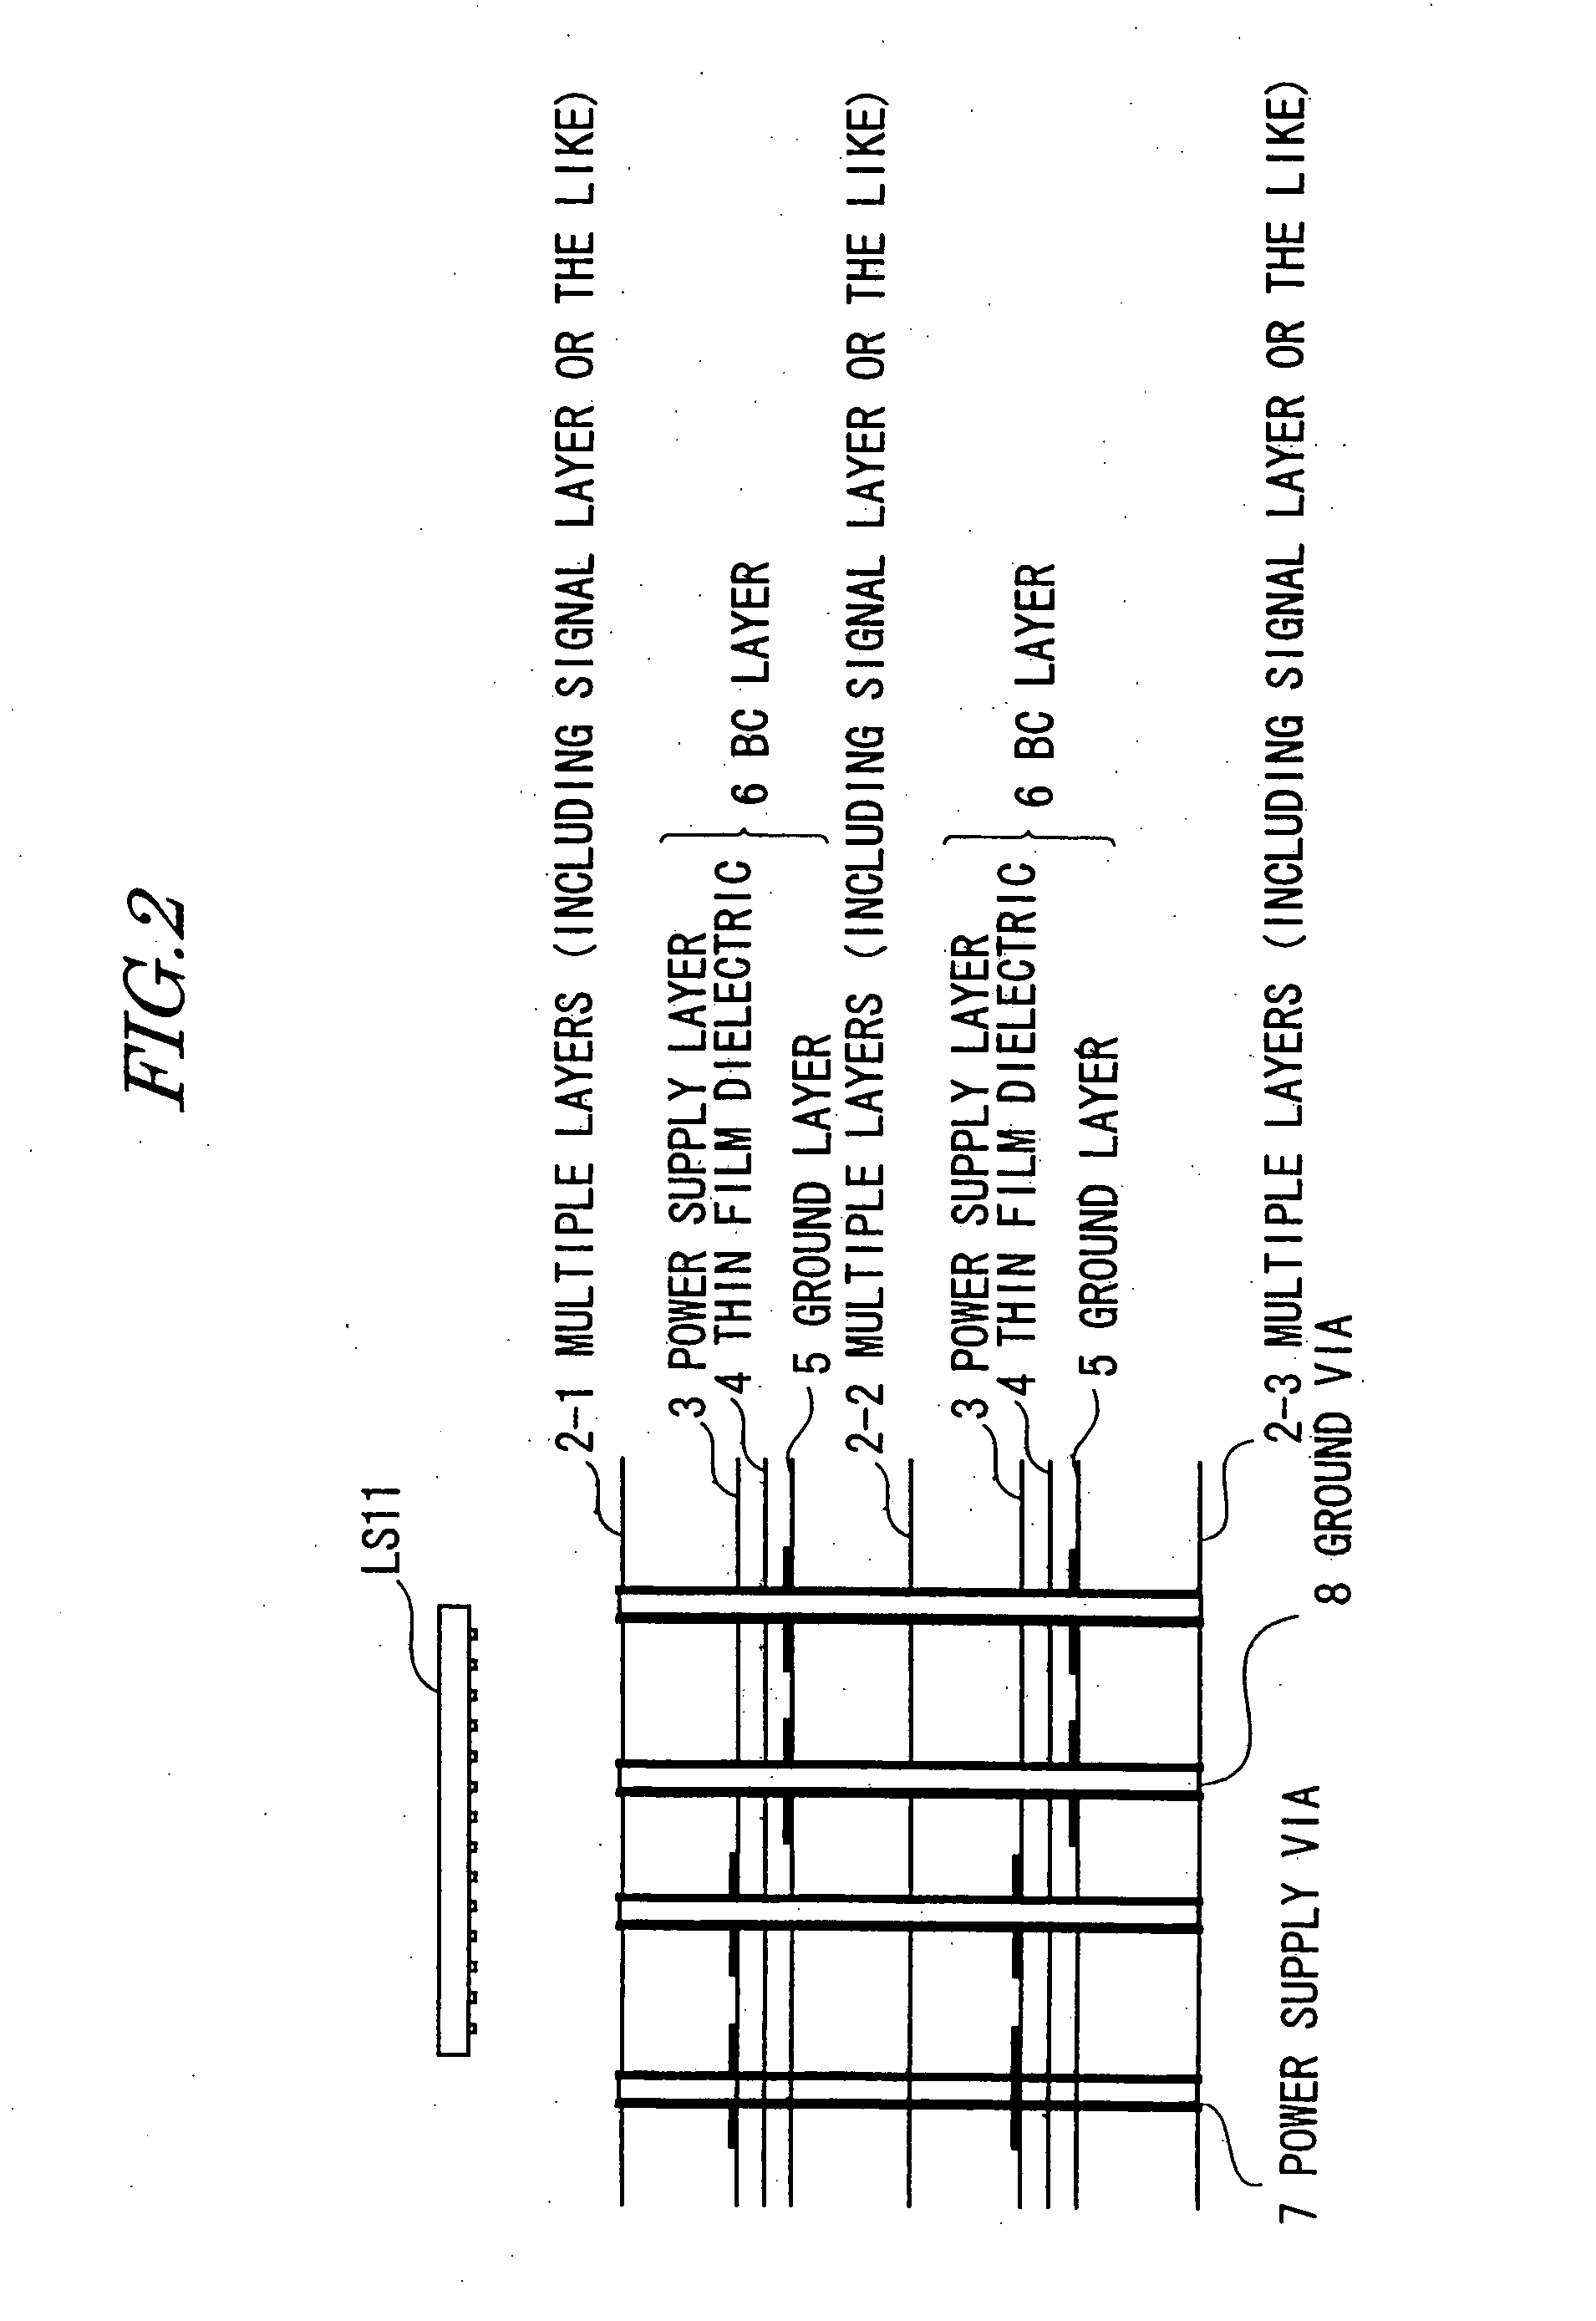 Multilayer printed board, electronic apparatus, and packaging method